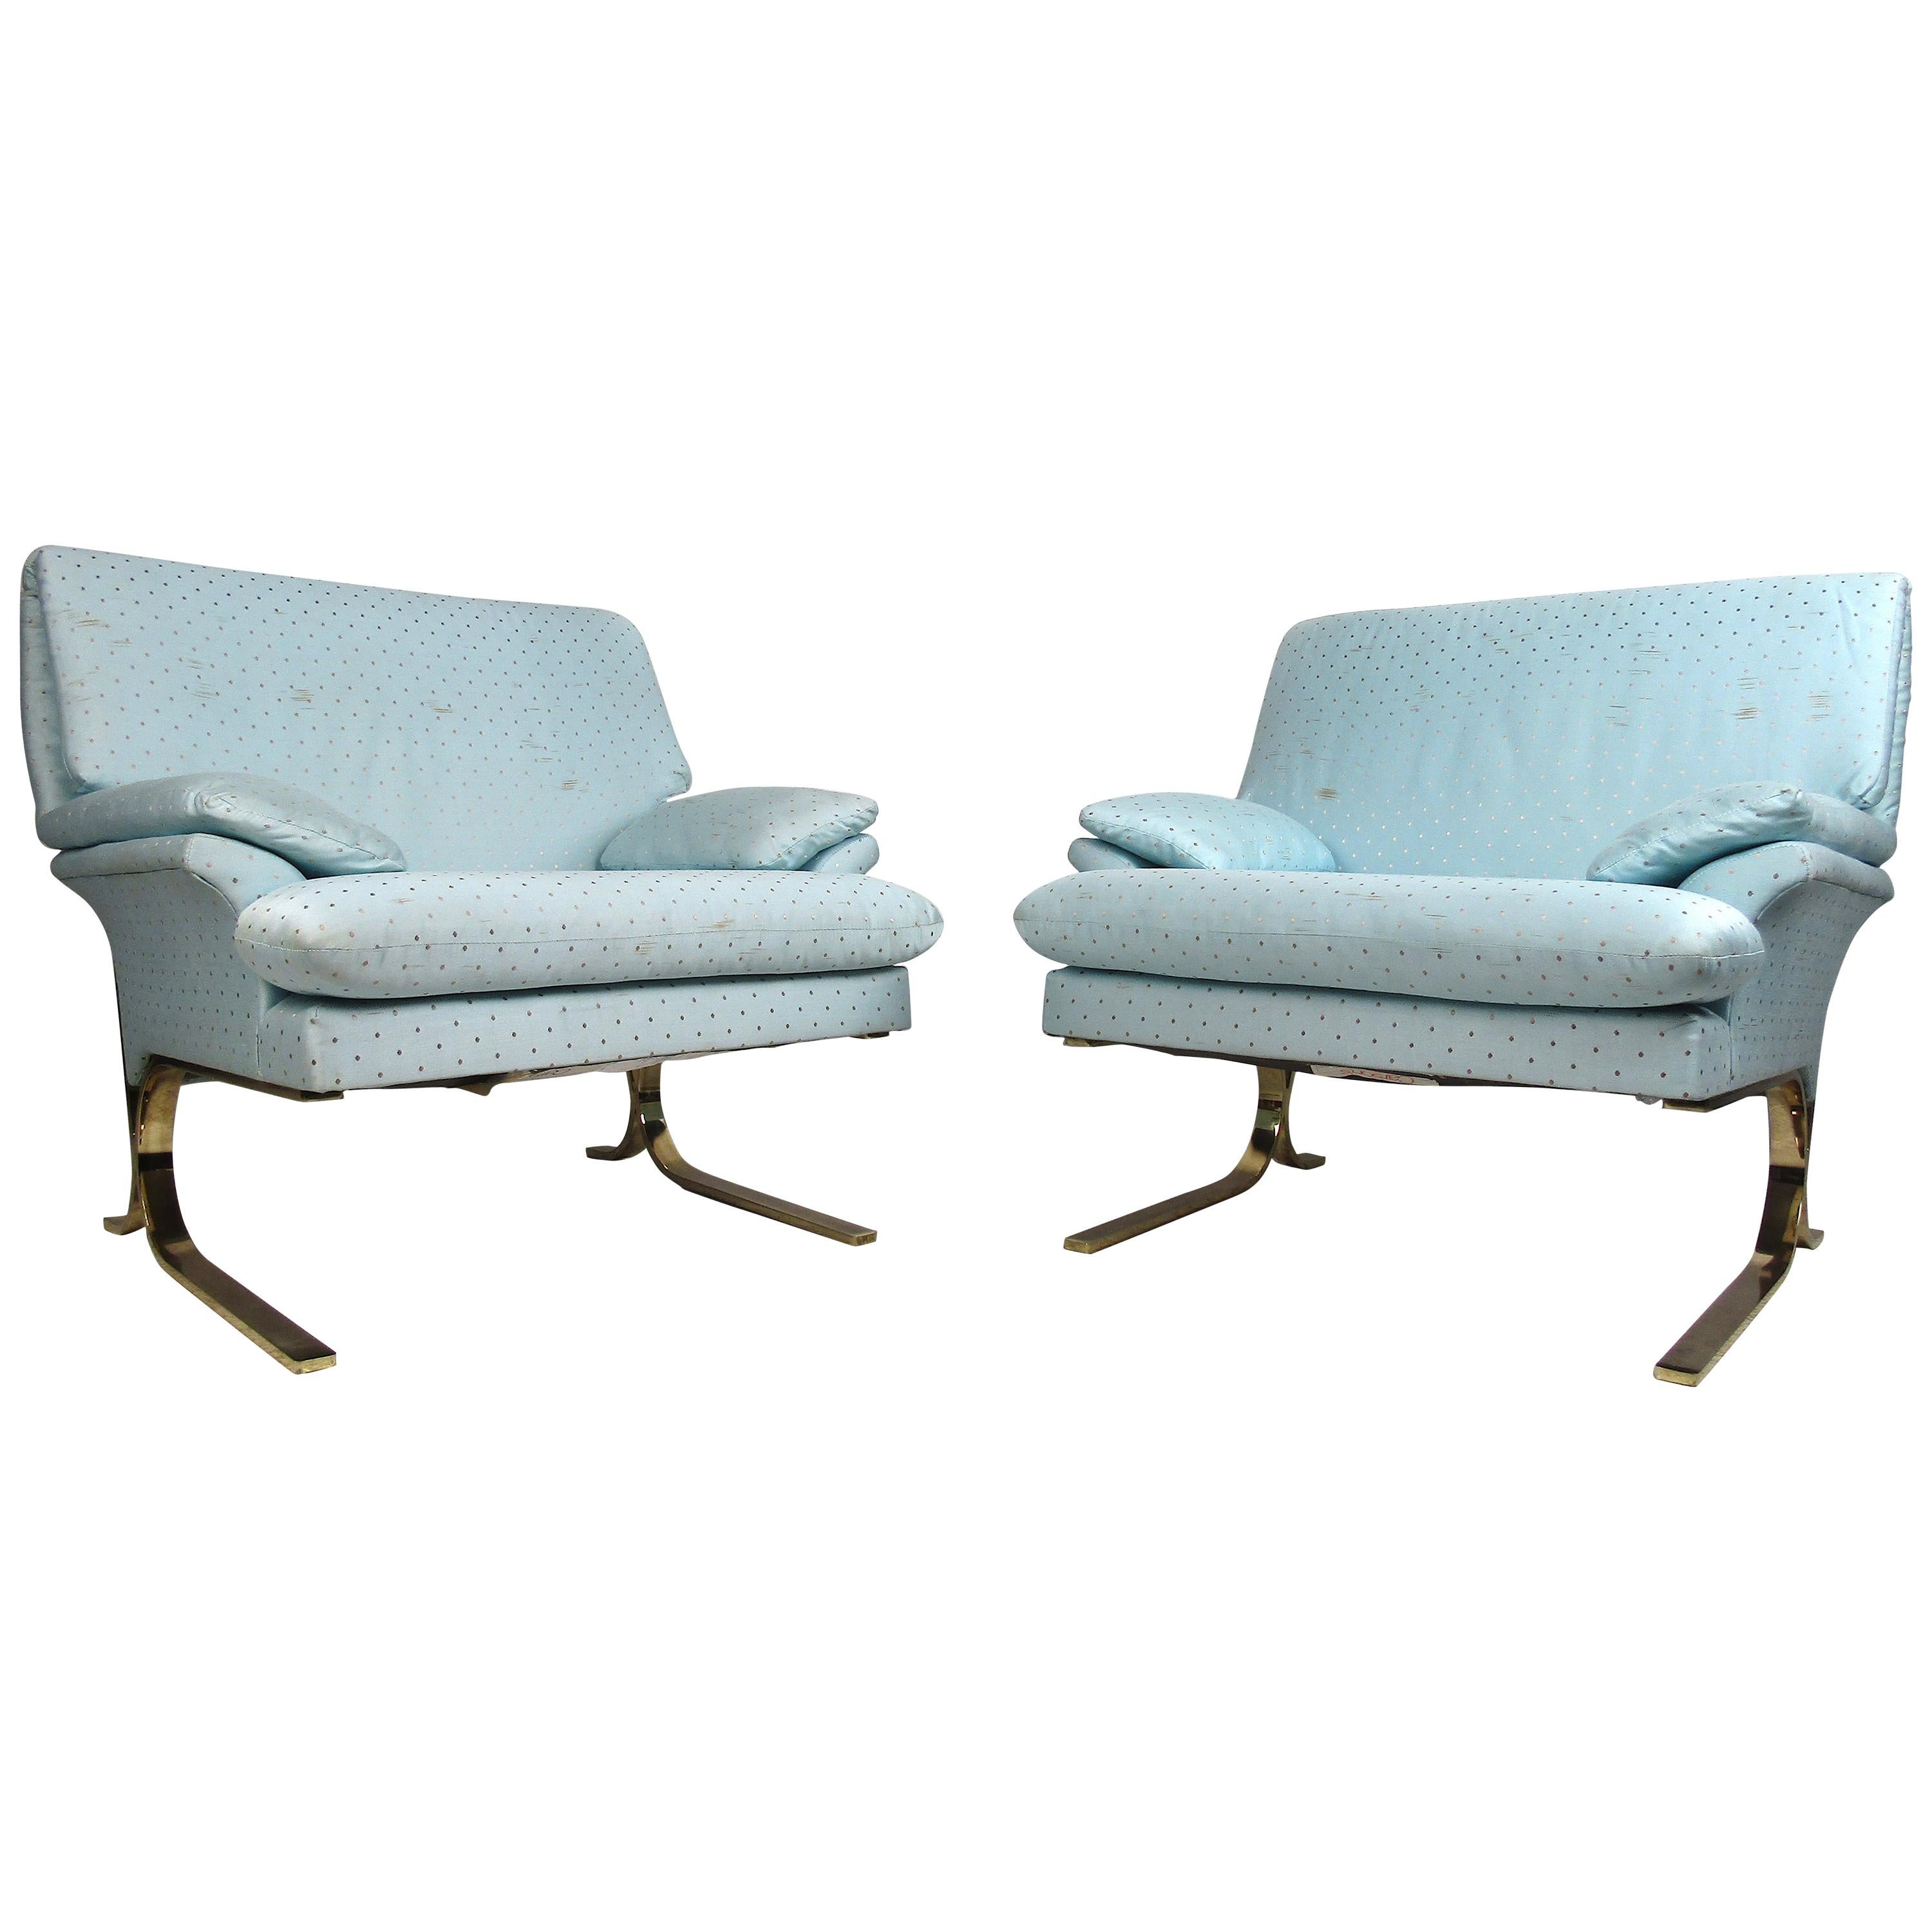 Vintage Modern Milo Baughman Style Cantilever Lounge Chairs For Sale